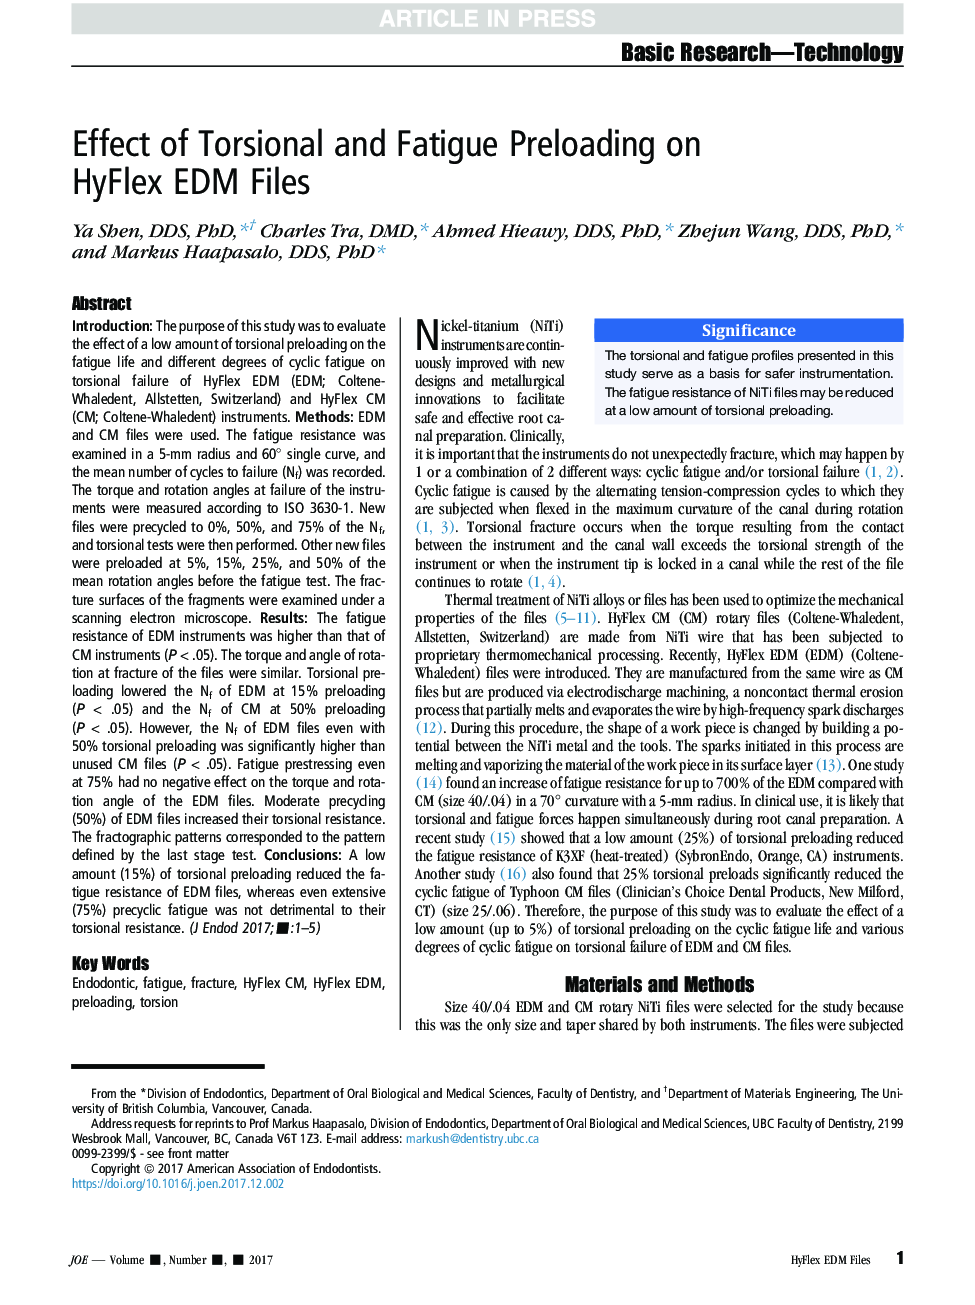 Effect of Torsional and Fatigue Preloading on HyFlex EDM Files